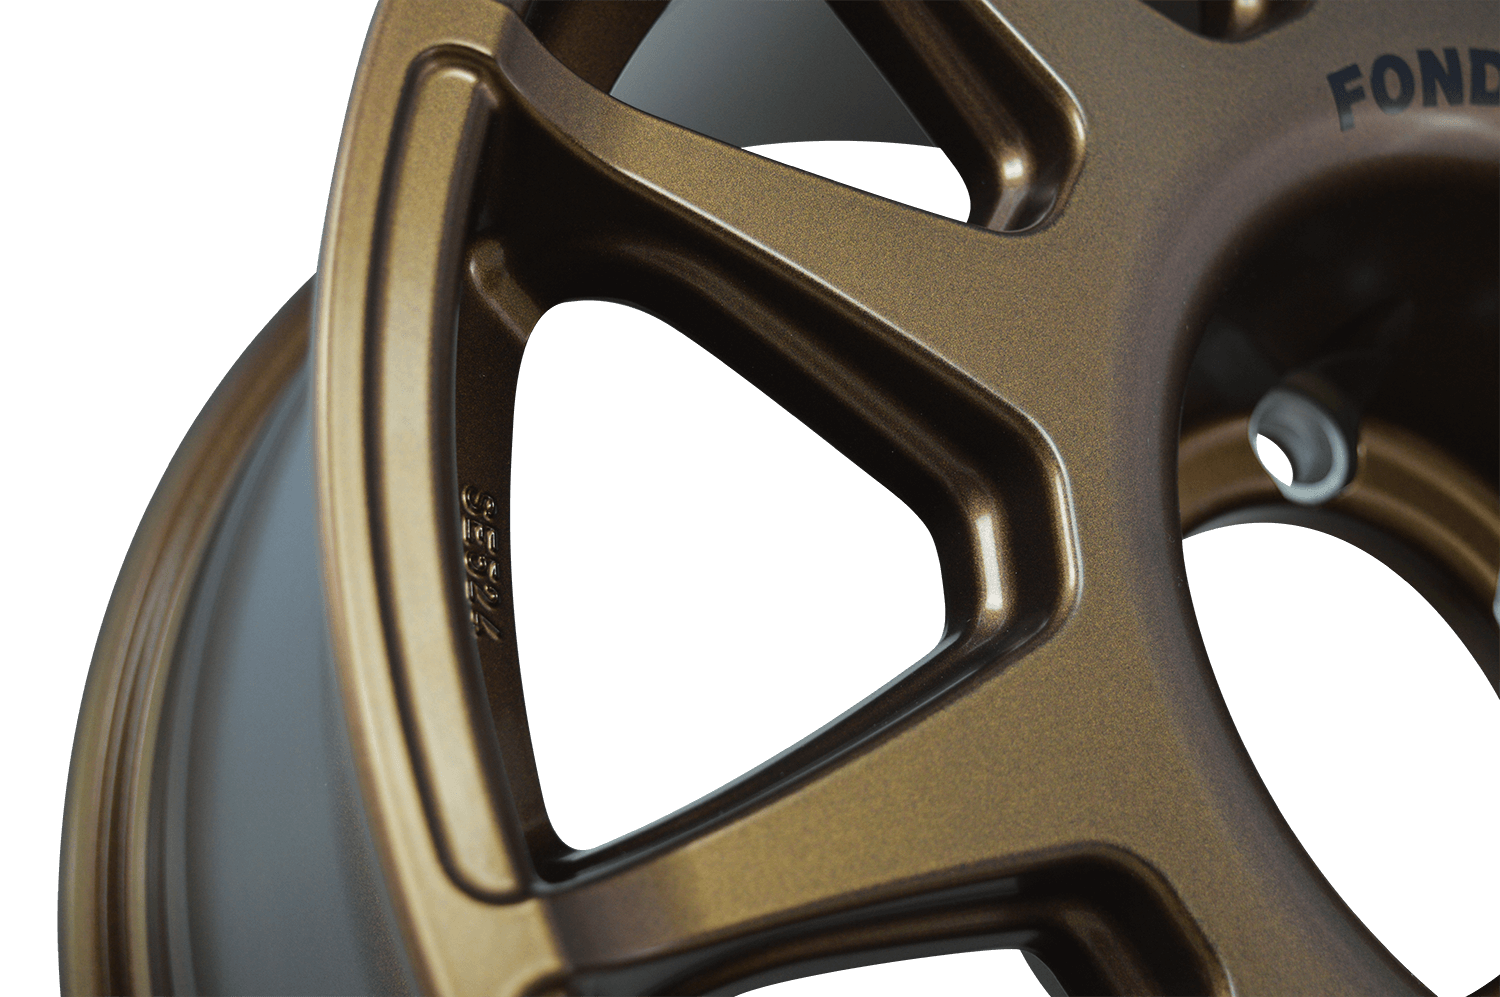 Evo Corse dakar wheel close spoke and rim mat bronze, for toyota land cruiser 300 series. the 4x4 off road light alloy wheel with the highest high load rating for overlanding, rally, 4wd expedition and off road use in australia